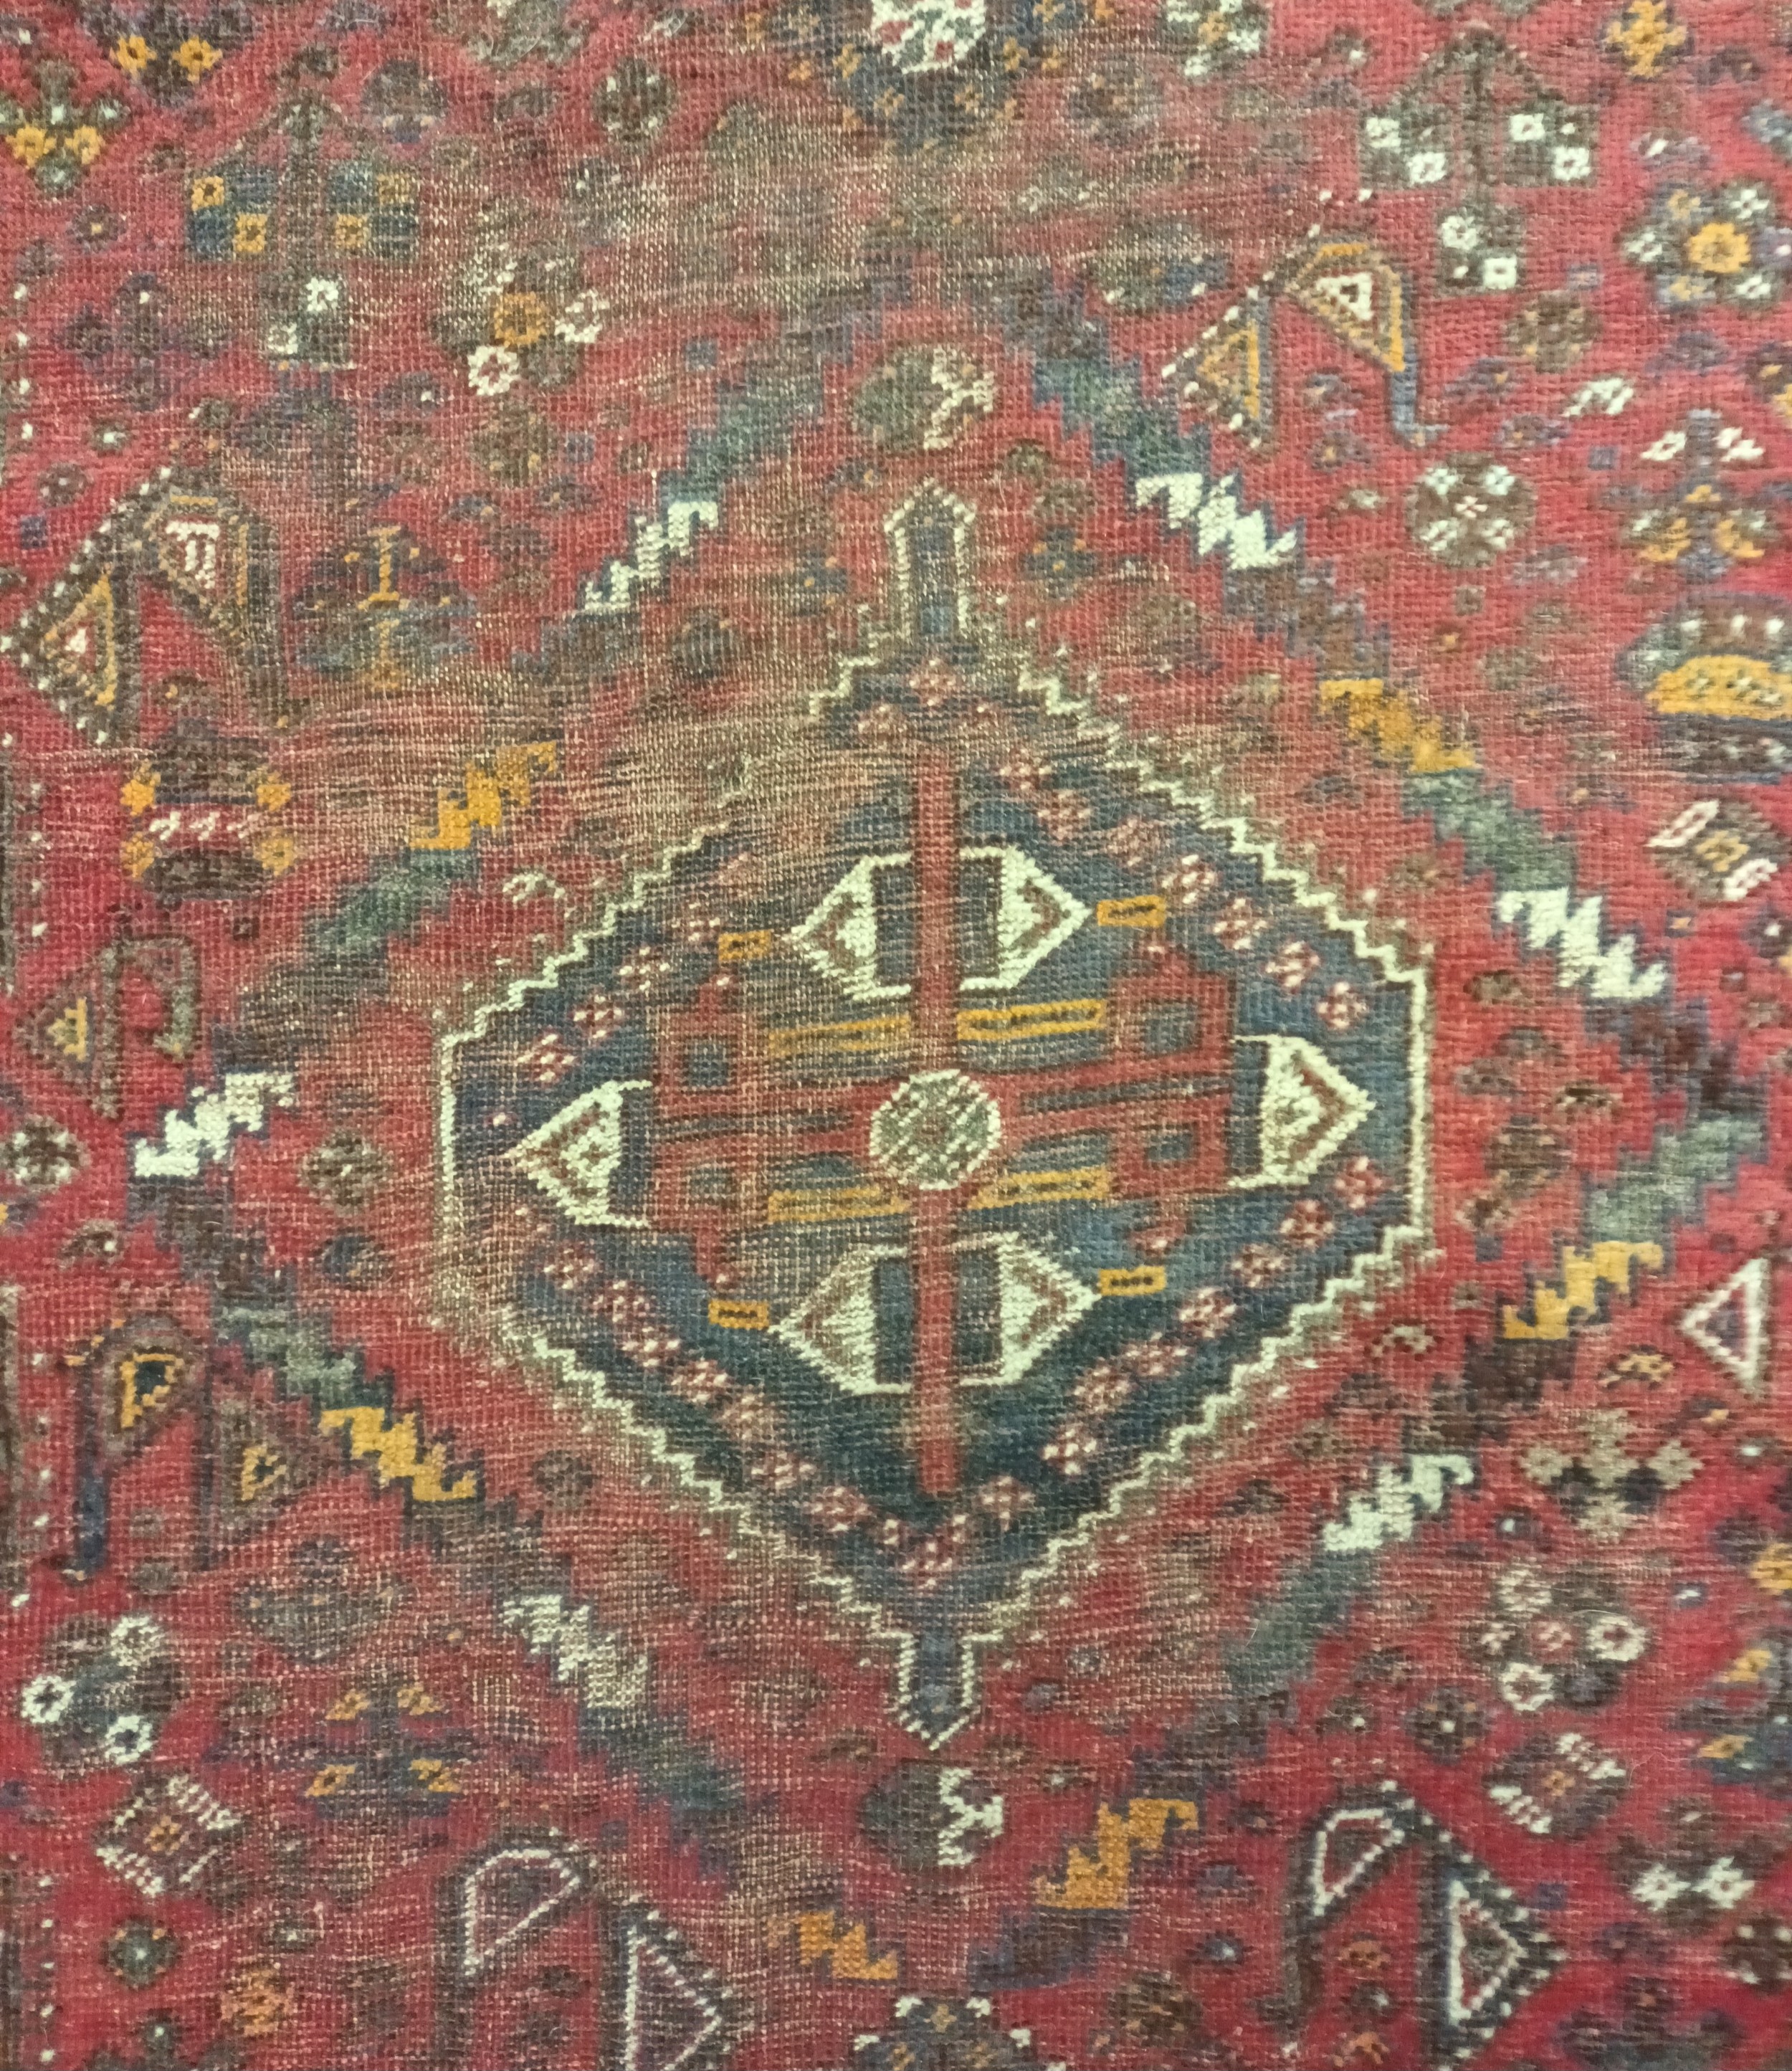 Large fine Persian tribal rug [260x170cm] - Image 2 of 3